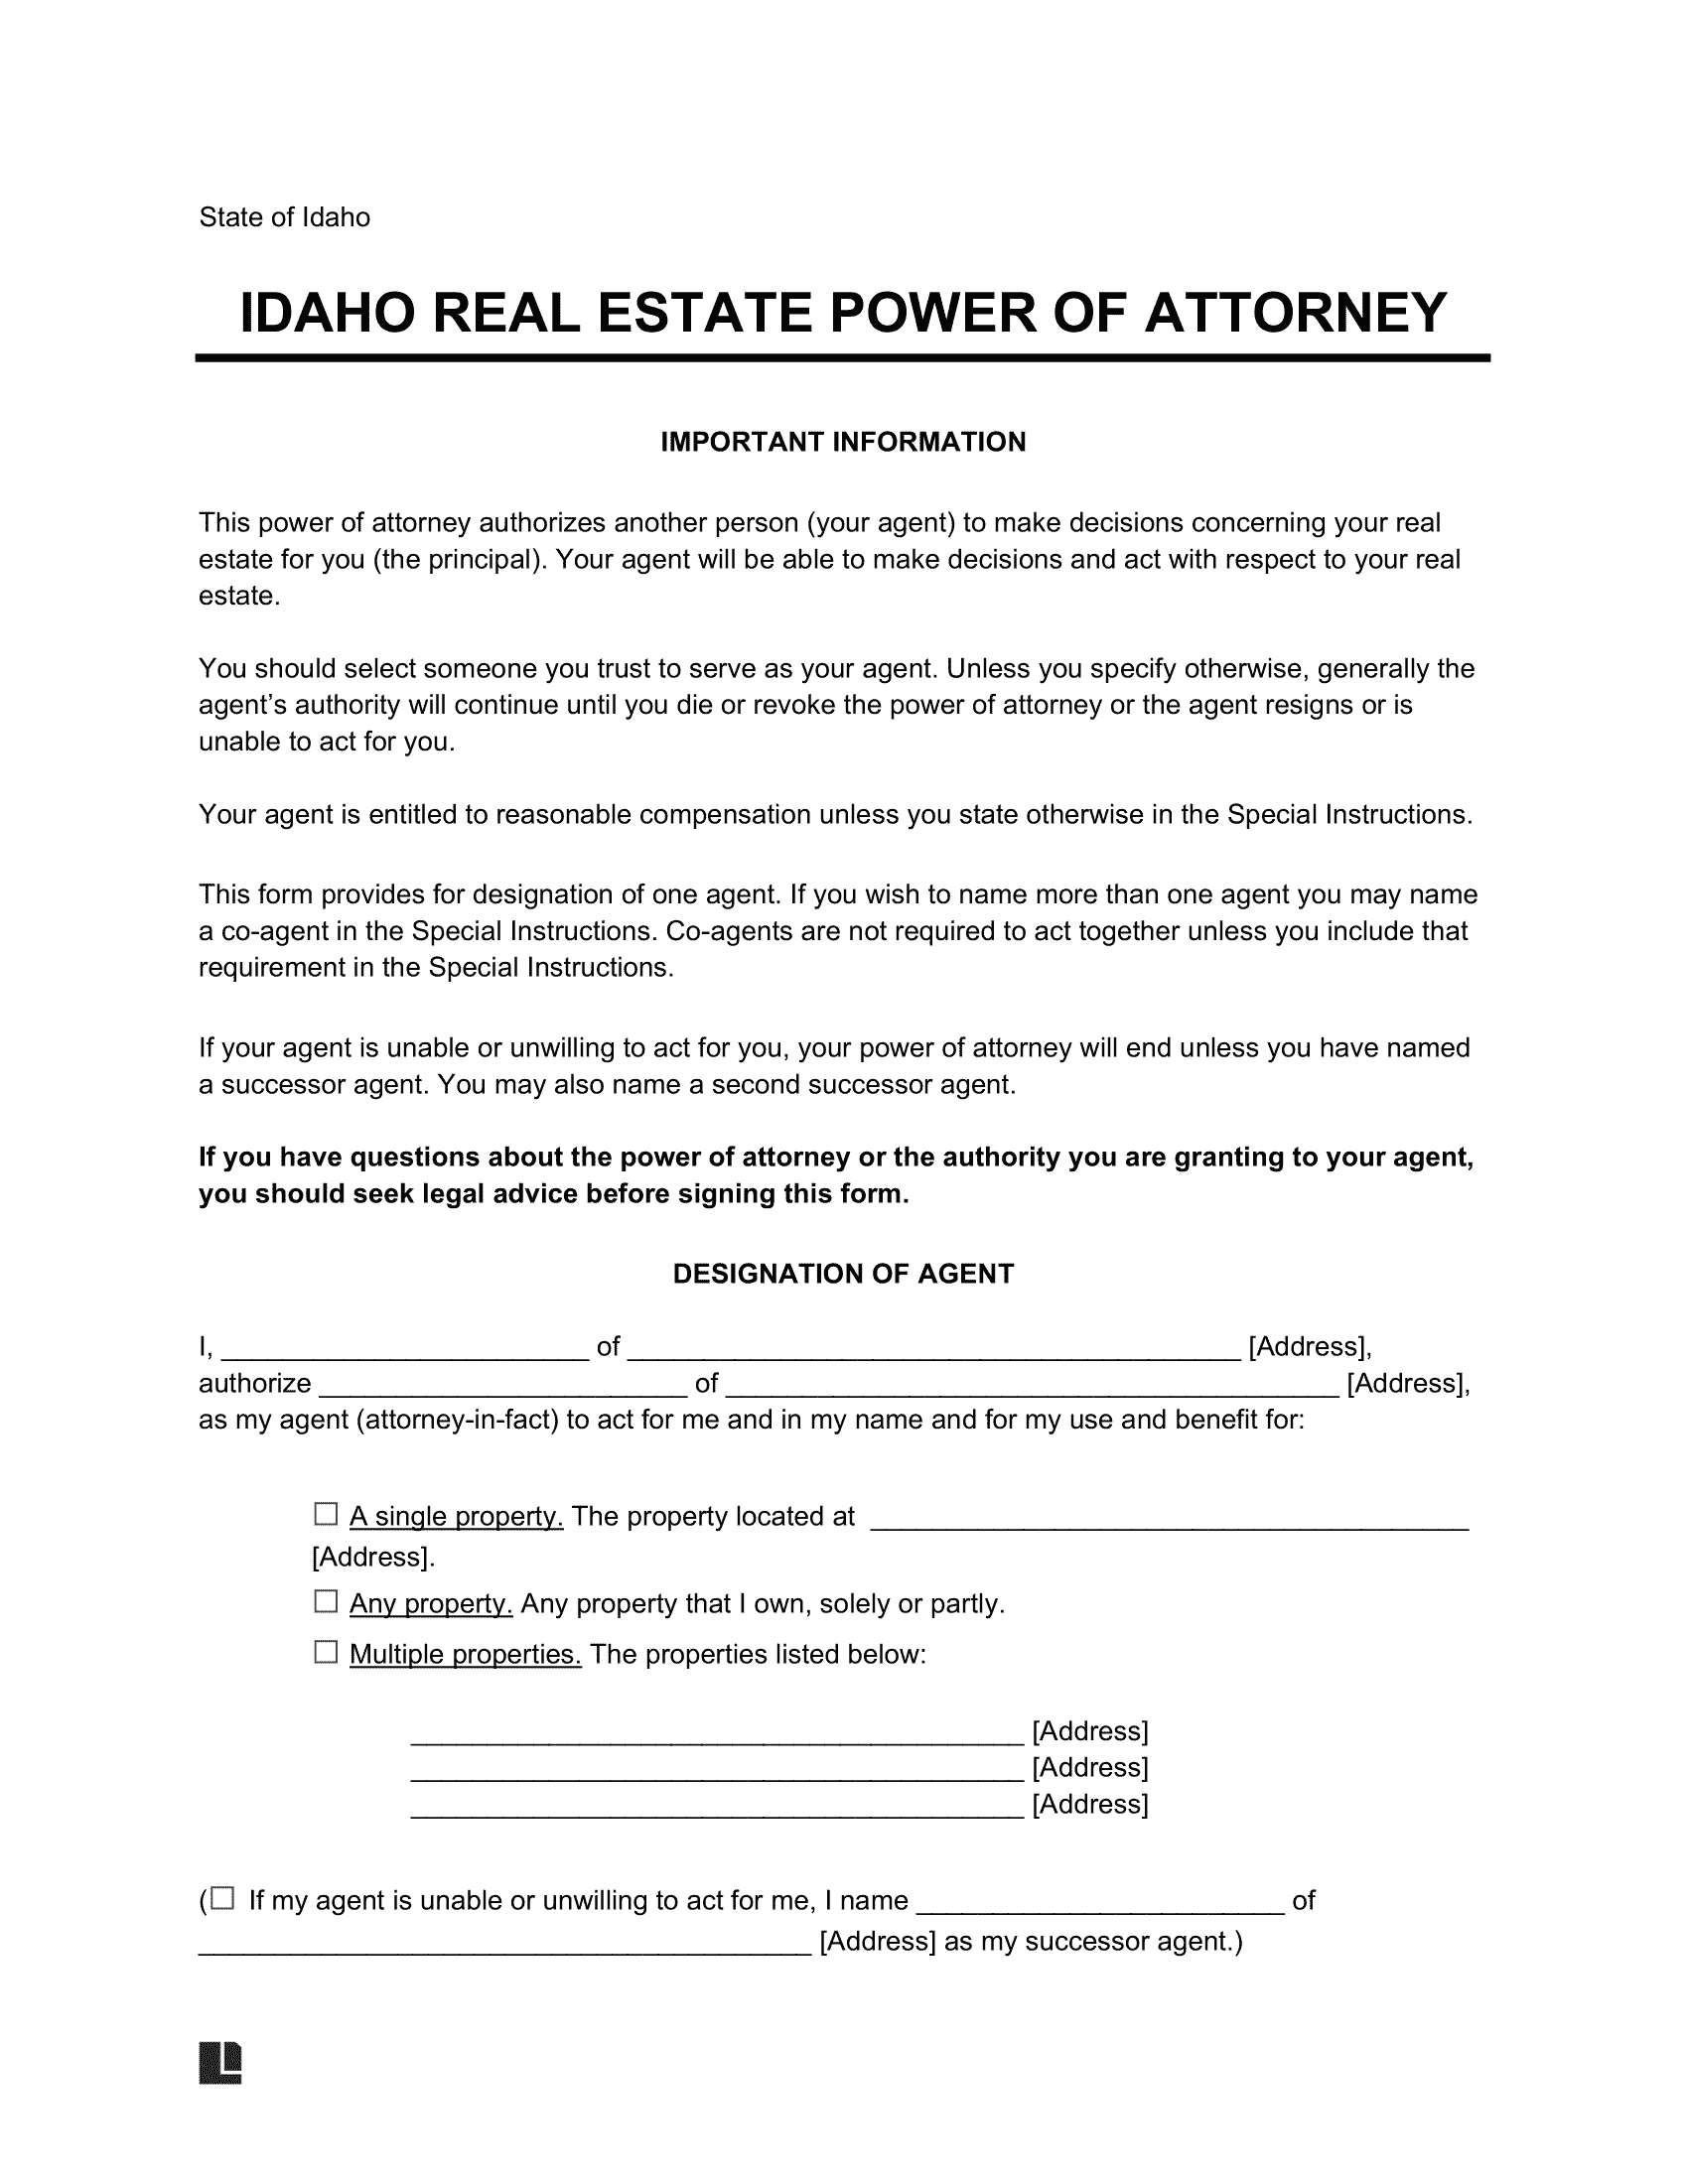 Idaho Real Estate Power of Attorney Form